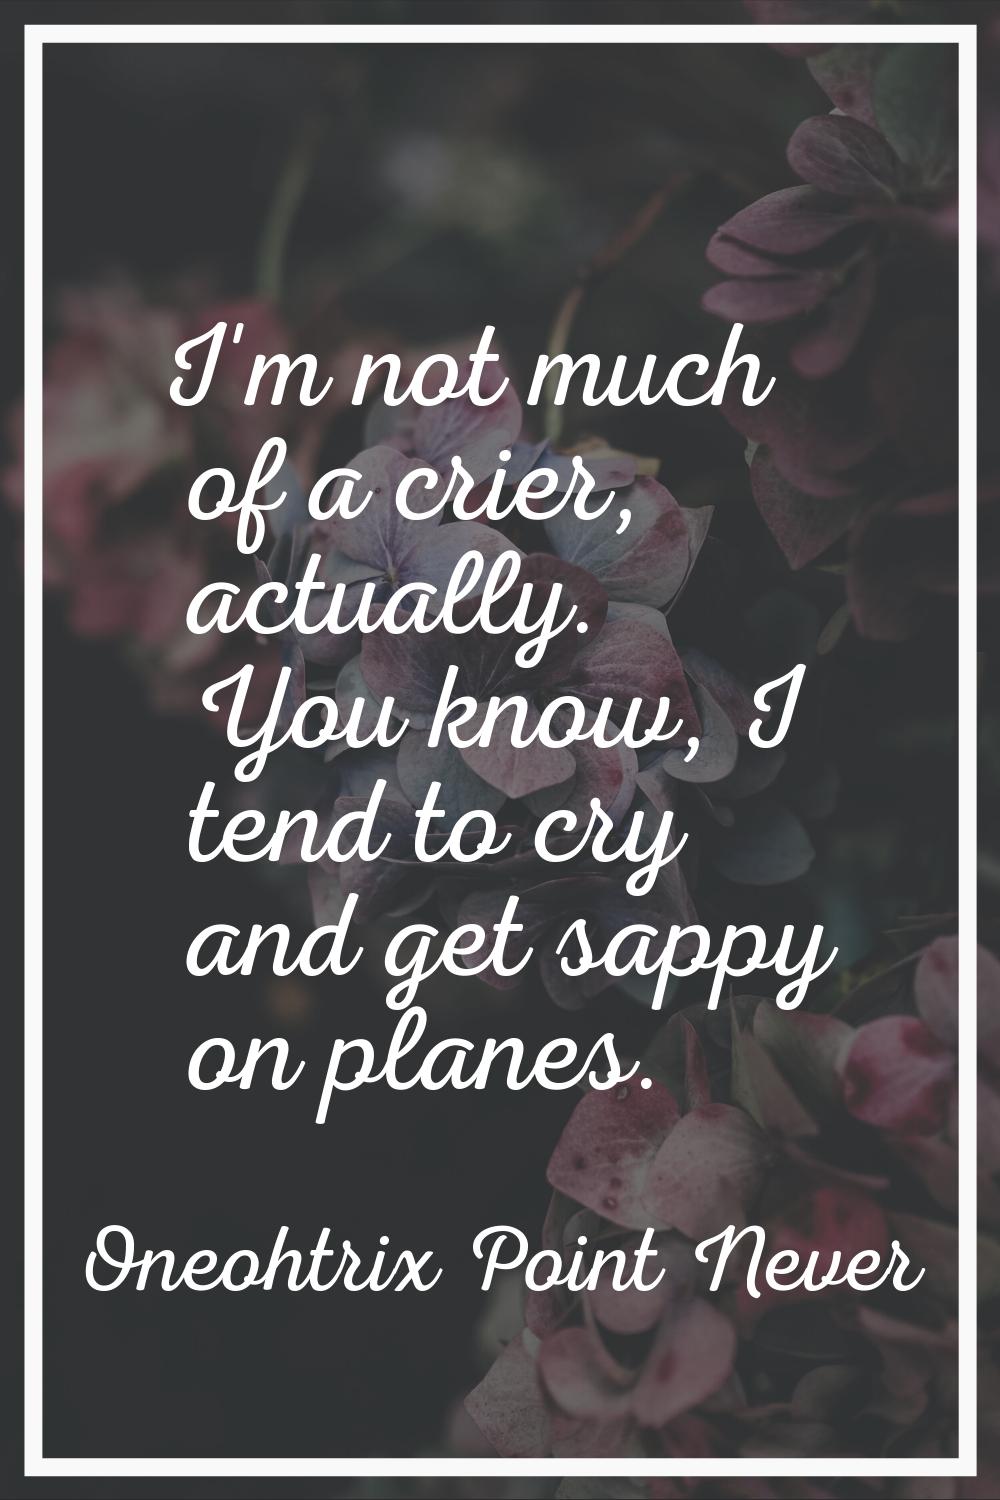 I'm not much of a crier, actually. You know, I tend to cry and get sappy on planes.